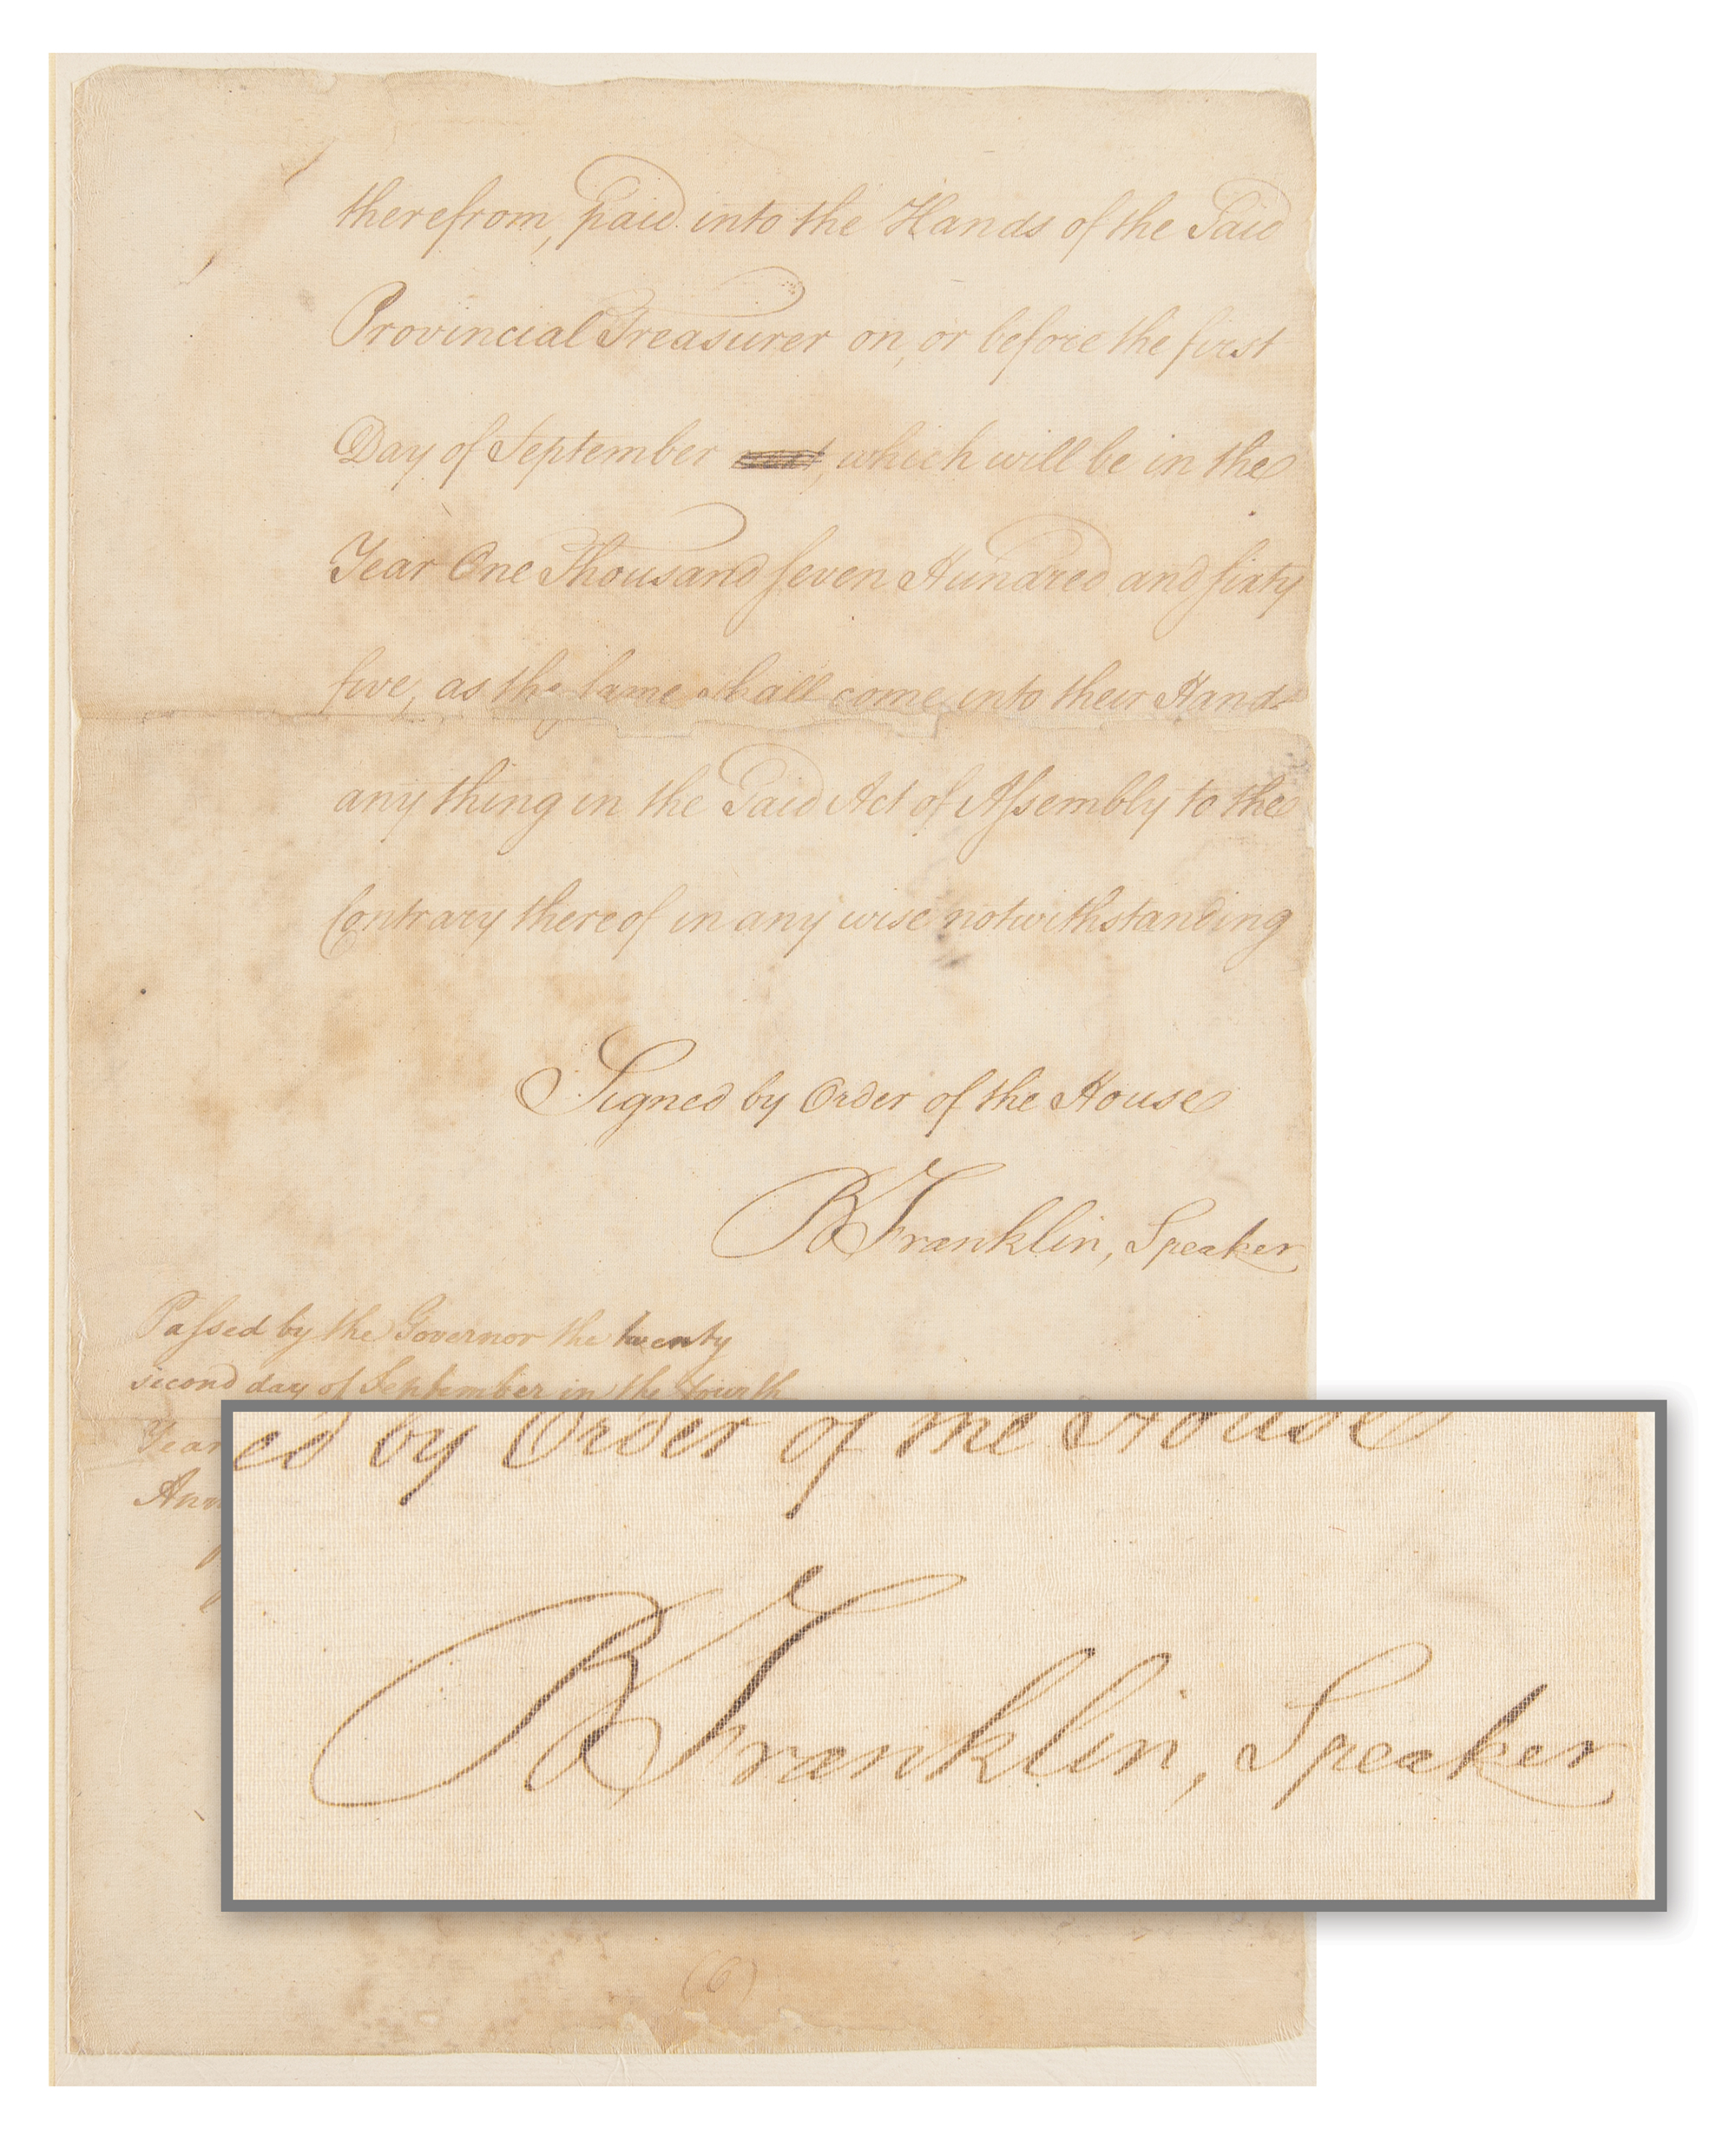 Lot #57 Benjamin Franklin Document Signed (1764) - Approving Funds for the Commissioners for Indian Affairs - Image 1